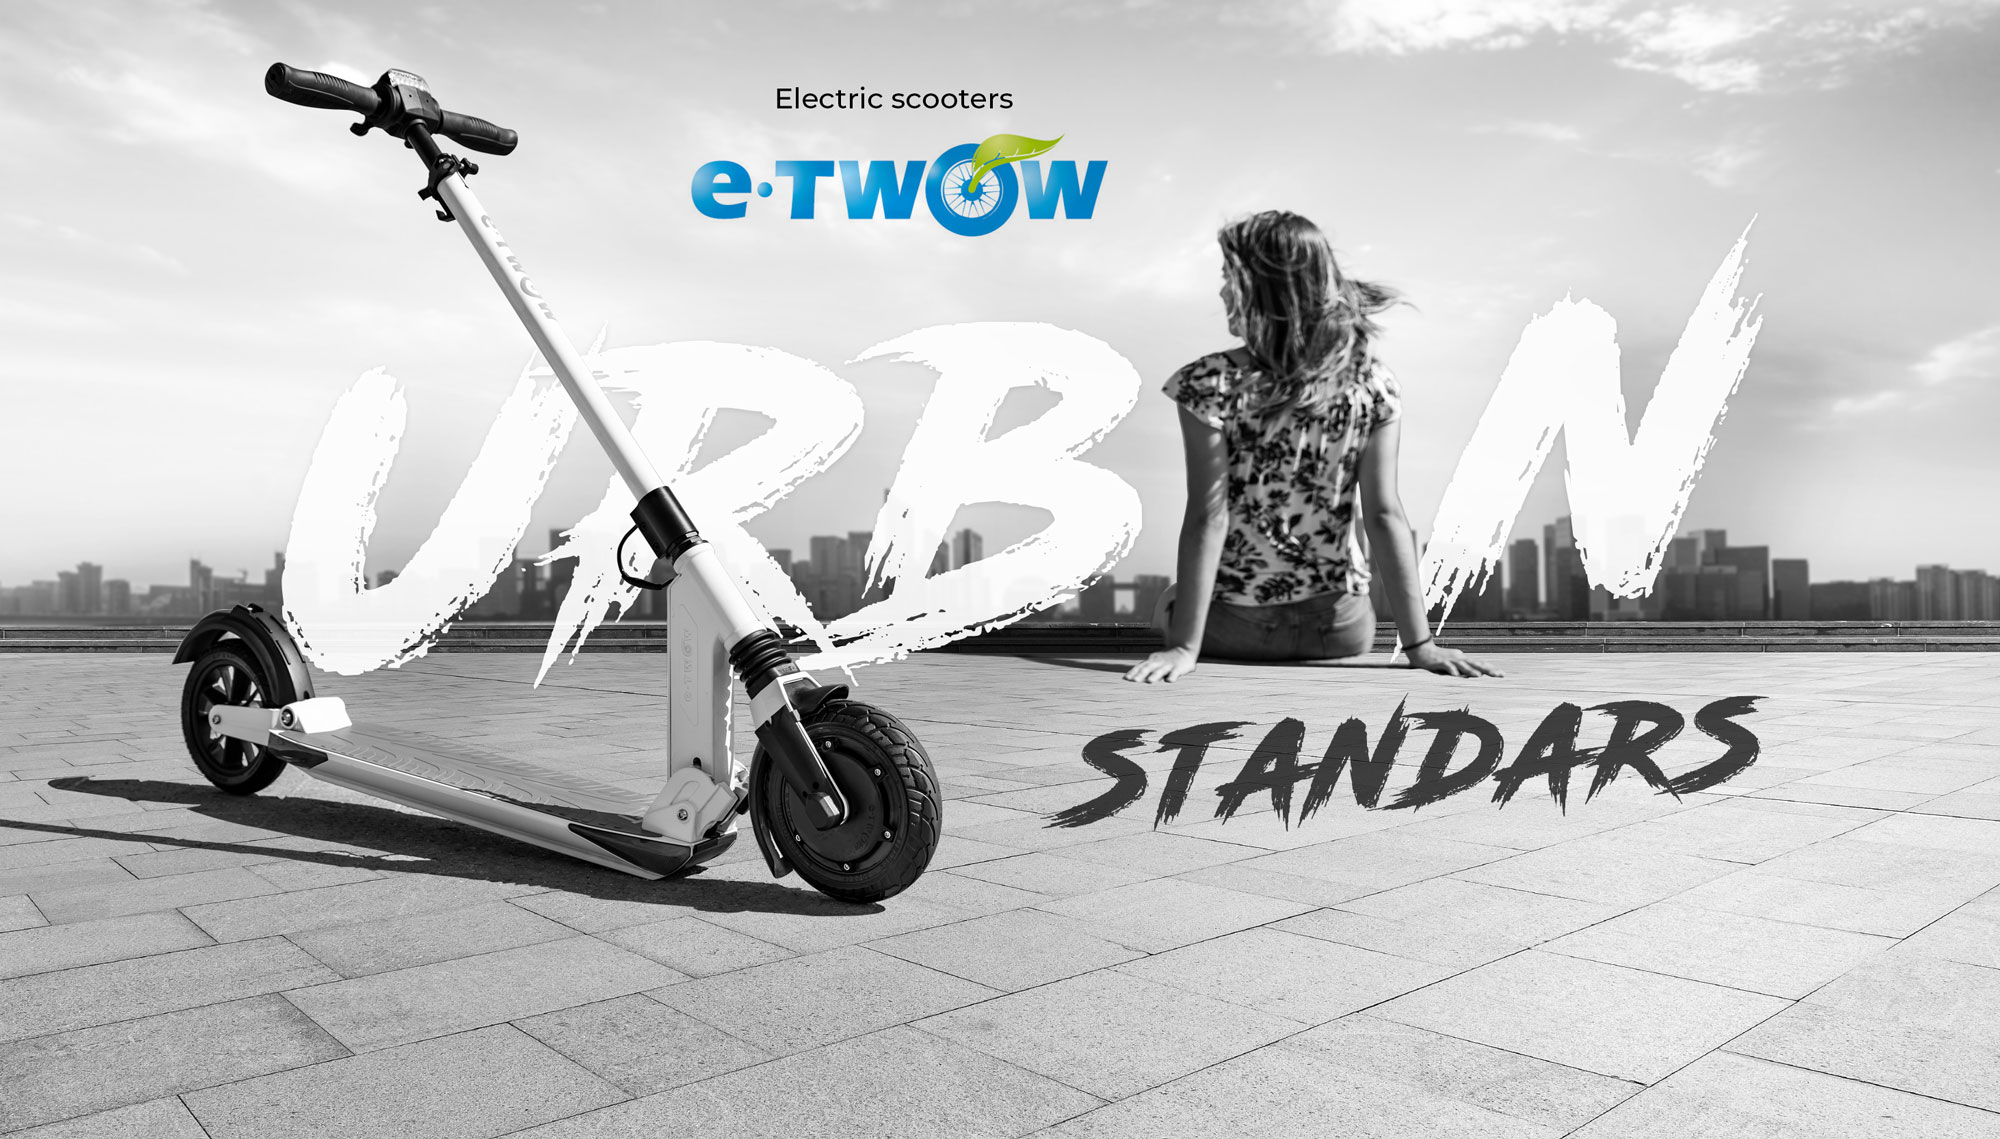 ETWOW electric scooters